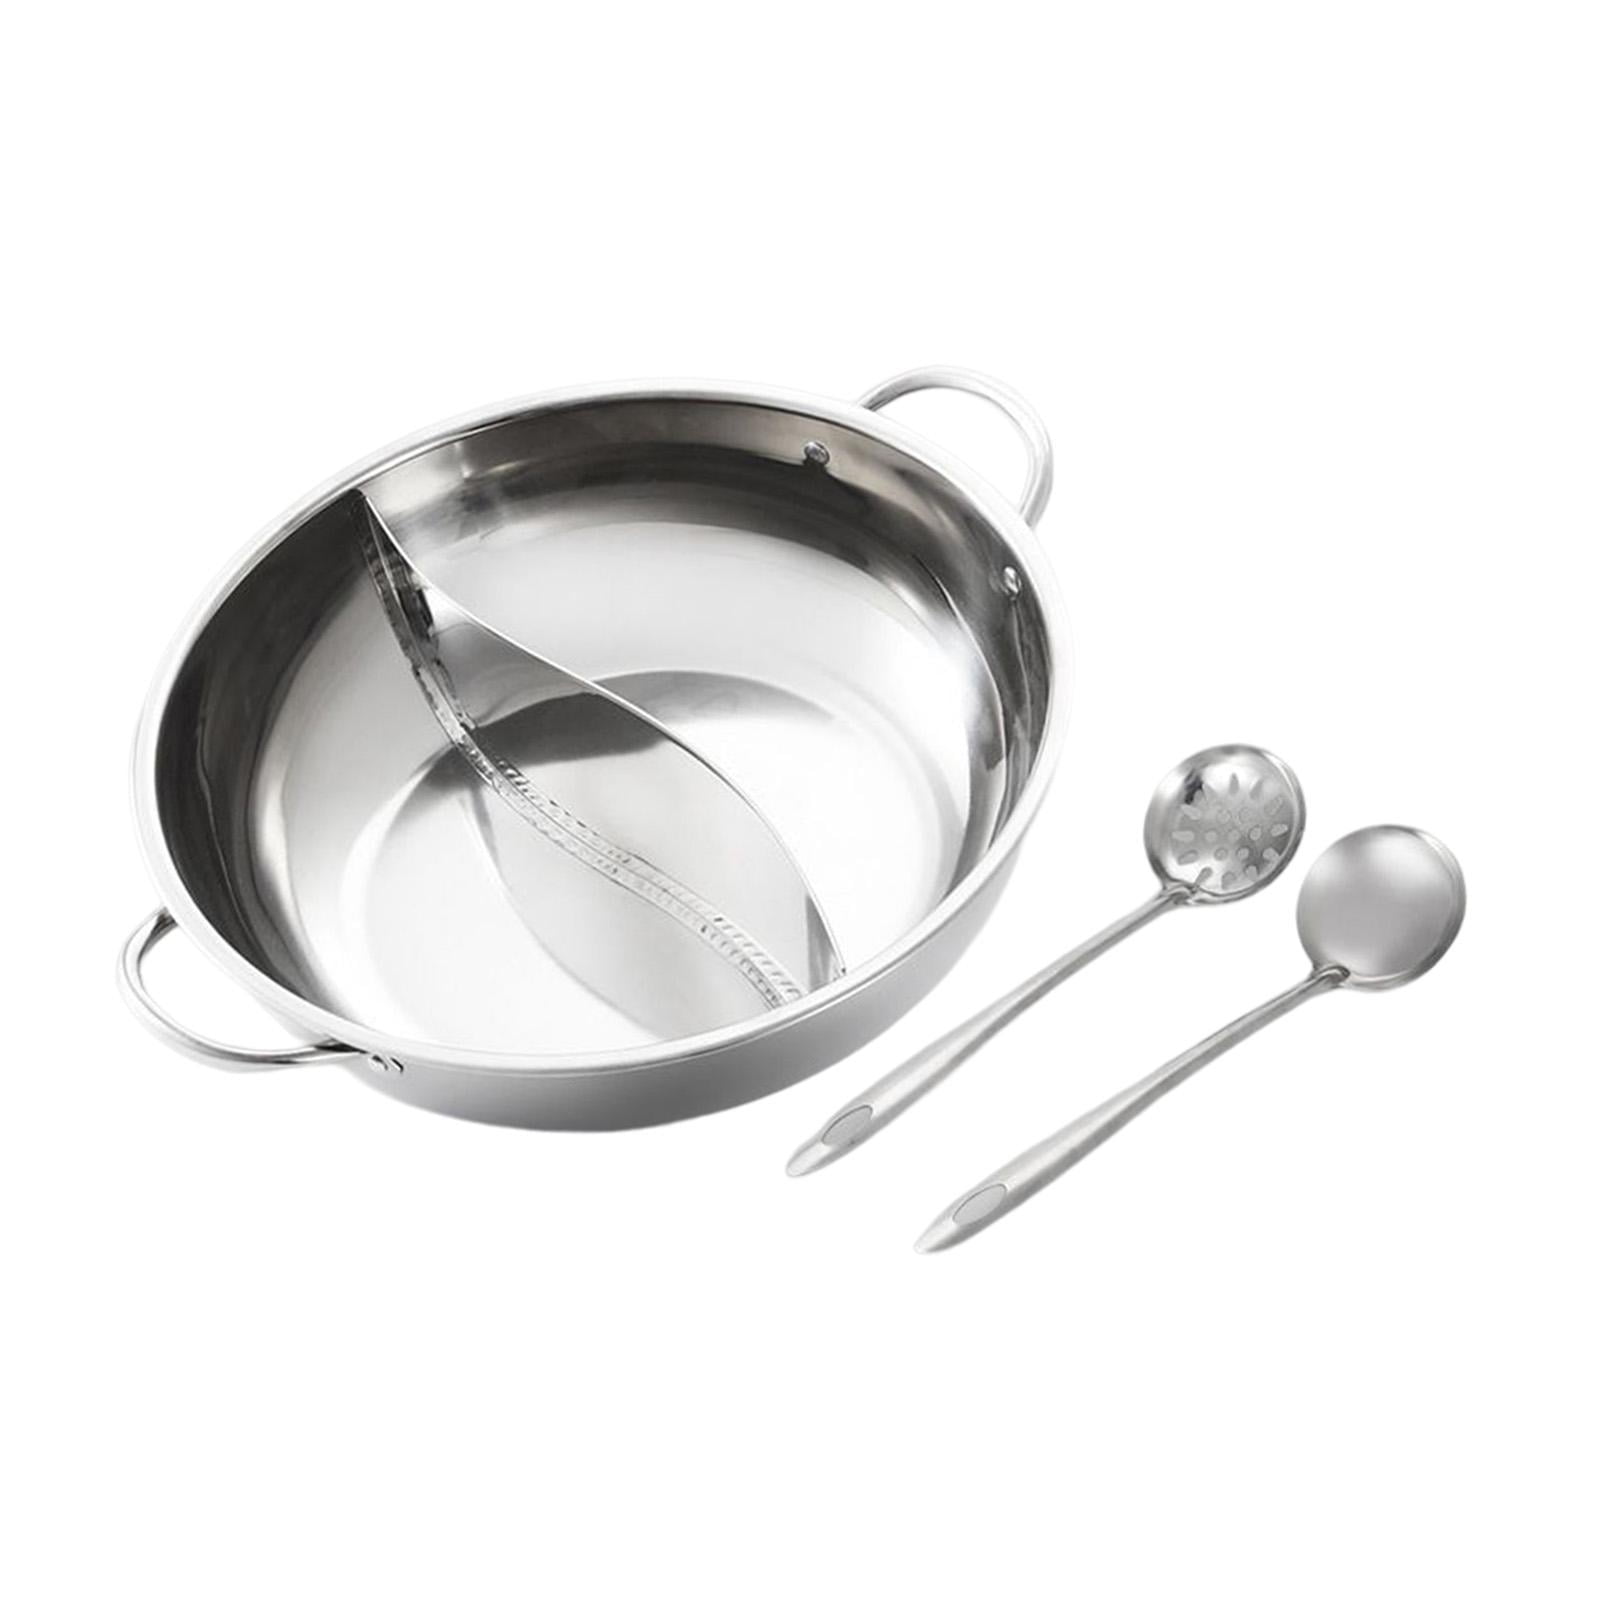 Kichvoe camping cookware wok stainless steel cookware shabu pan metal pans  for cooking household kitchenware small cooking pots household pan dry pot